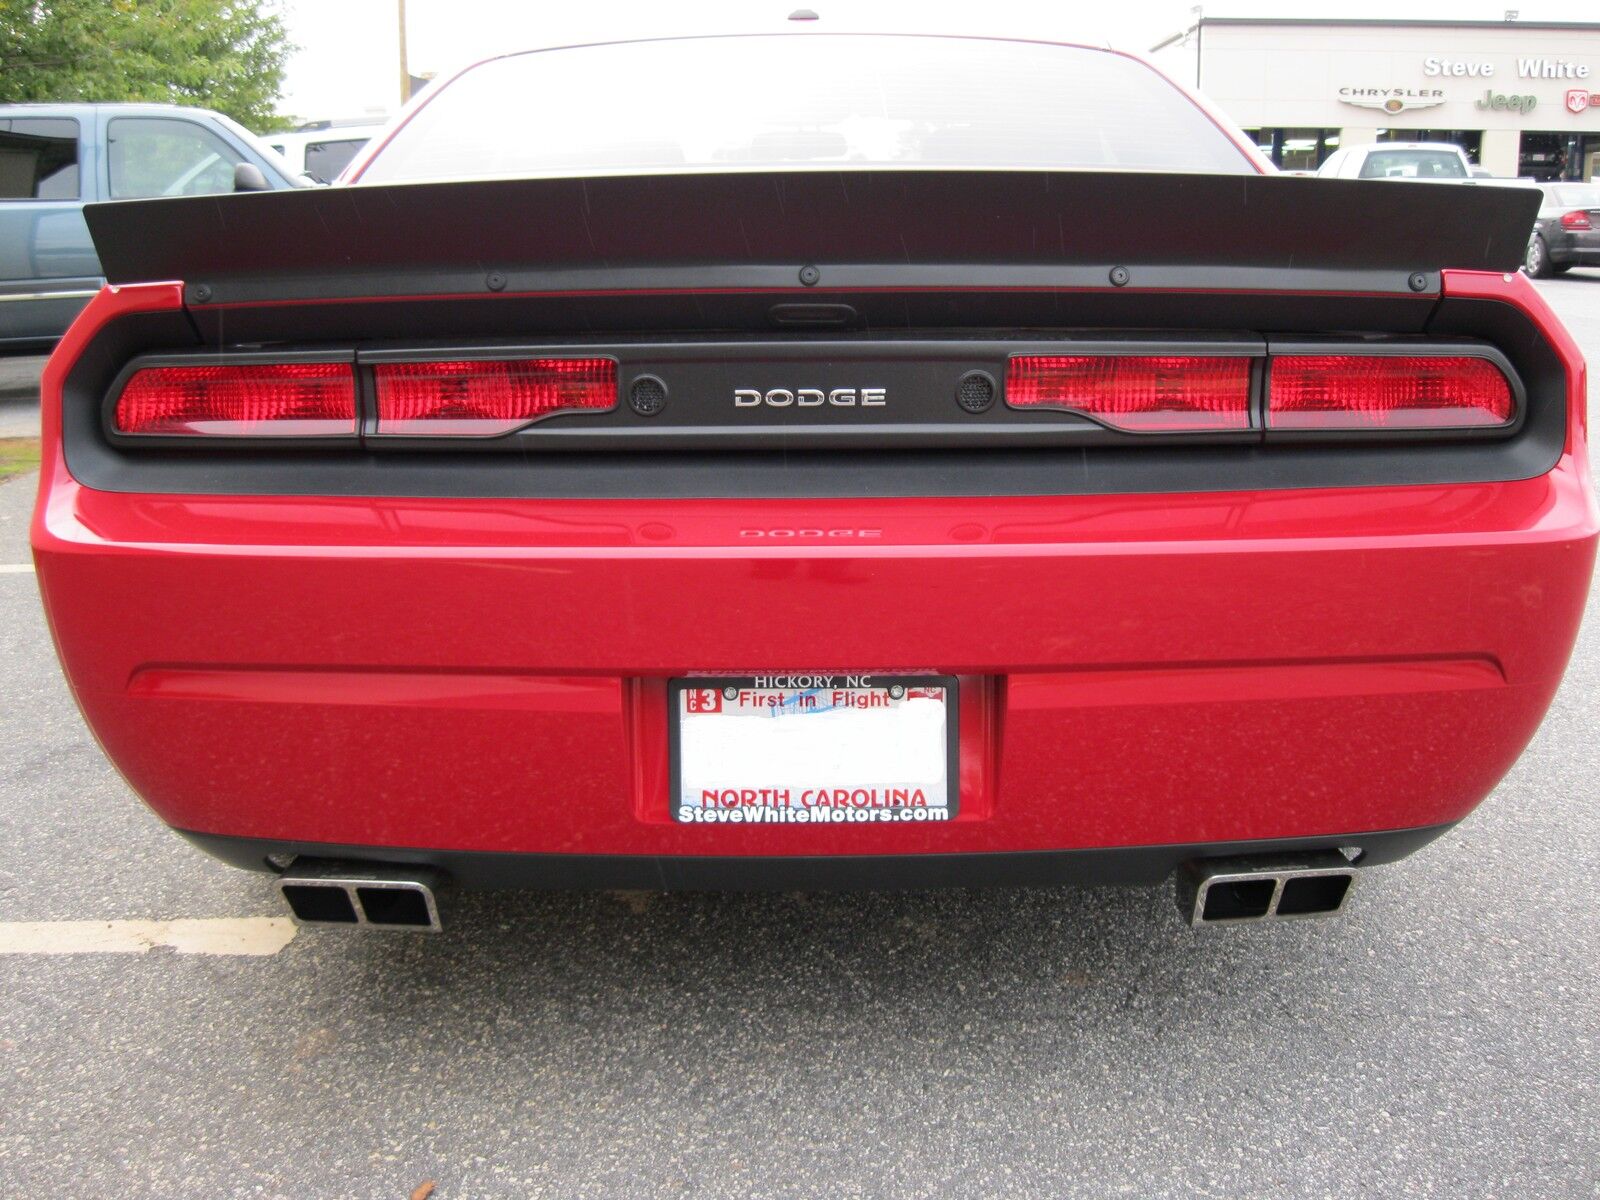 DODGE CHALLENGER DAYTONA TAIL LIGHT TAILLIGHT LAMPS OVERLAYS COVERS COVER NEW